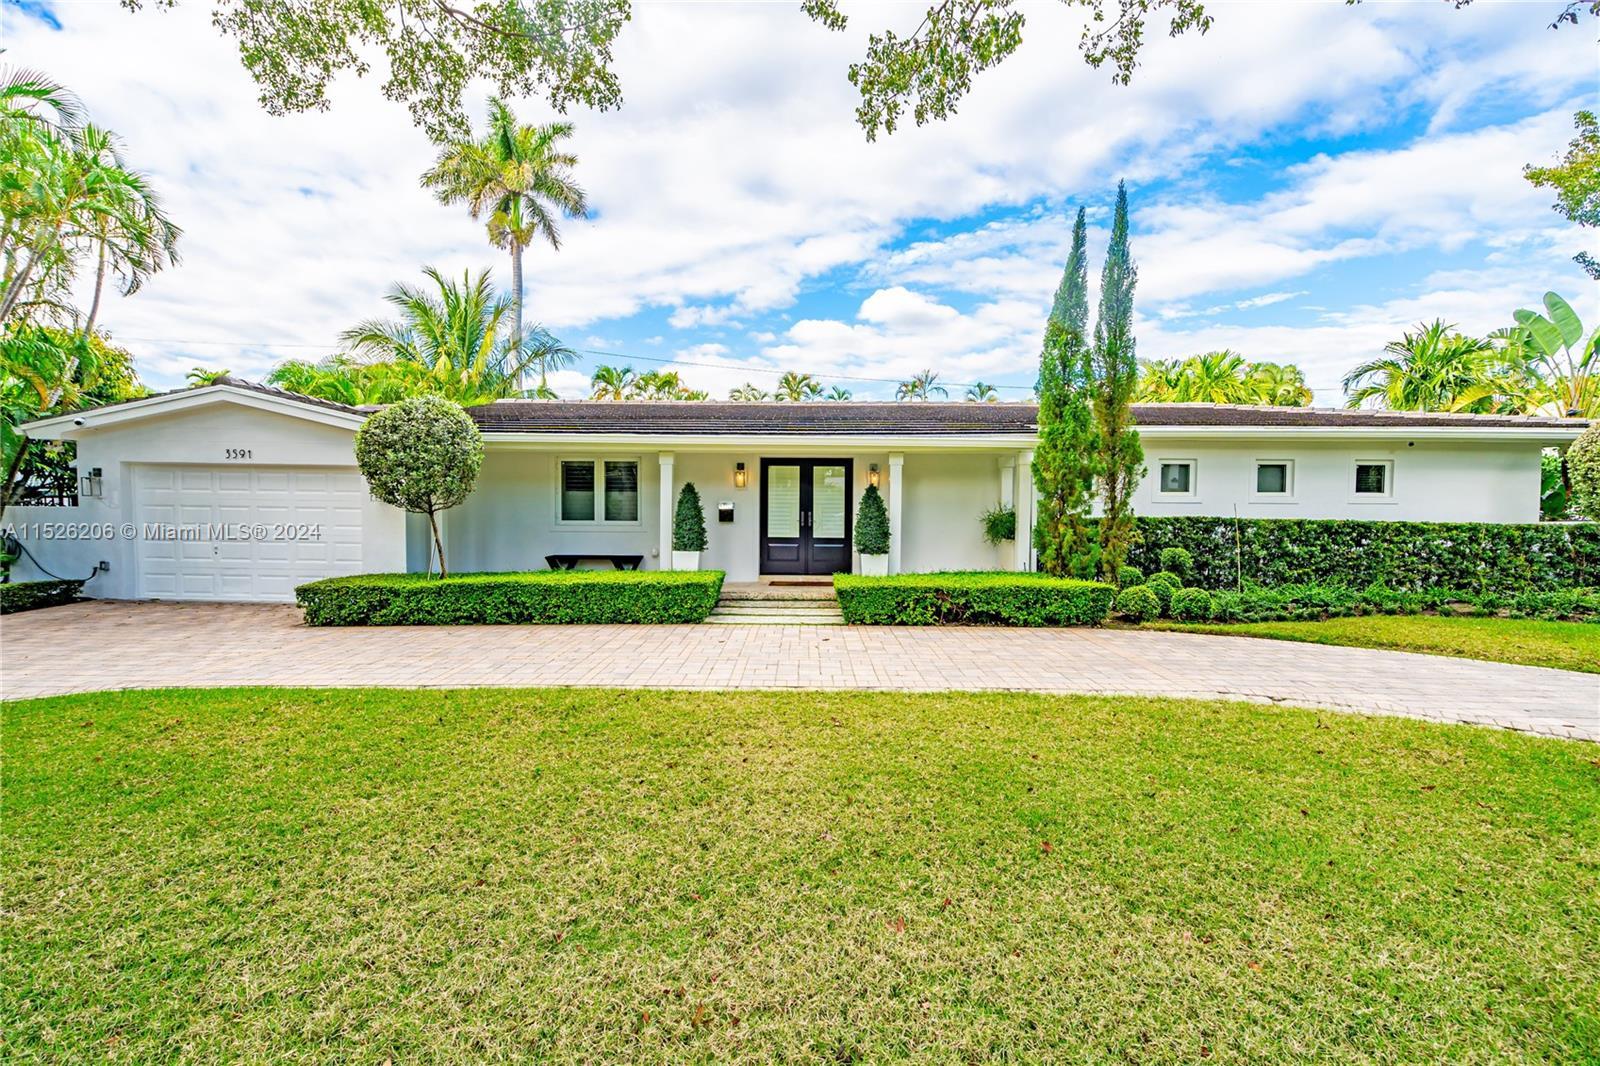 Photo of 3591 N Prospect Dr in Coral Gables, FL